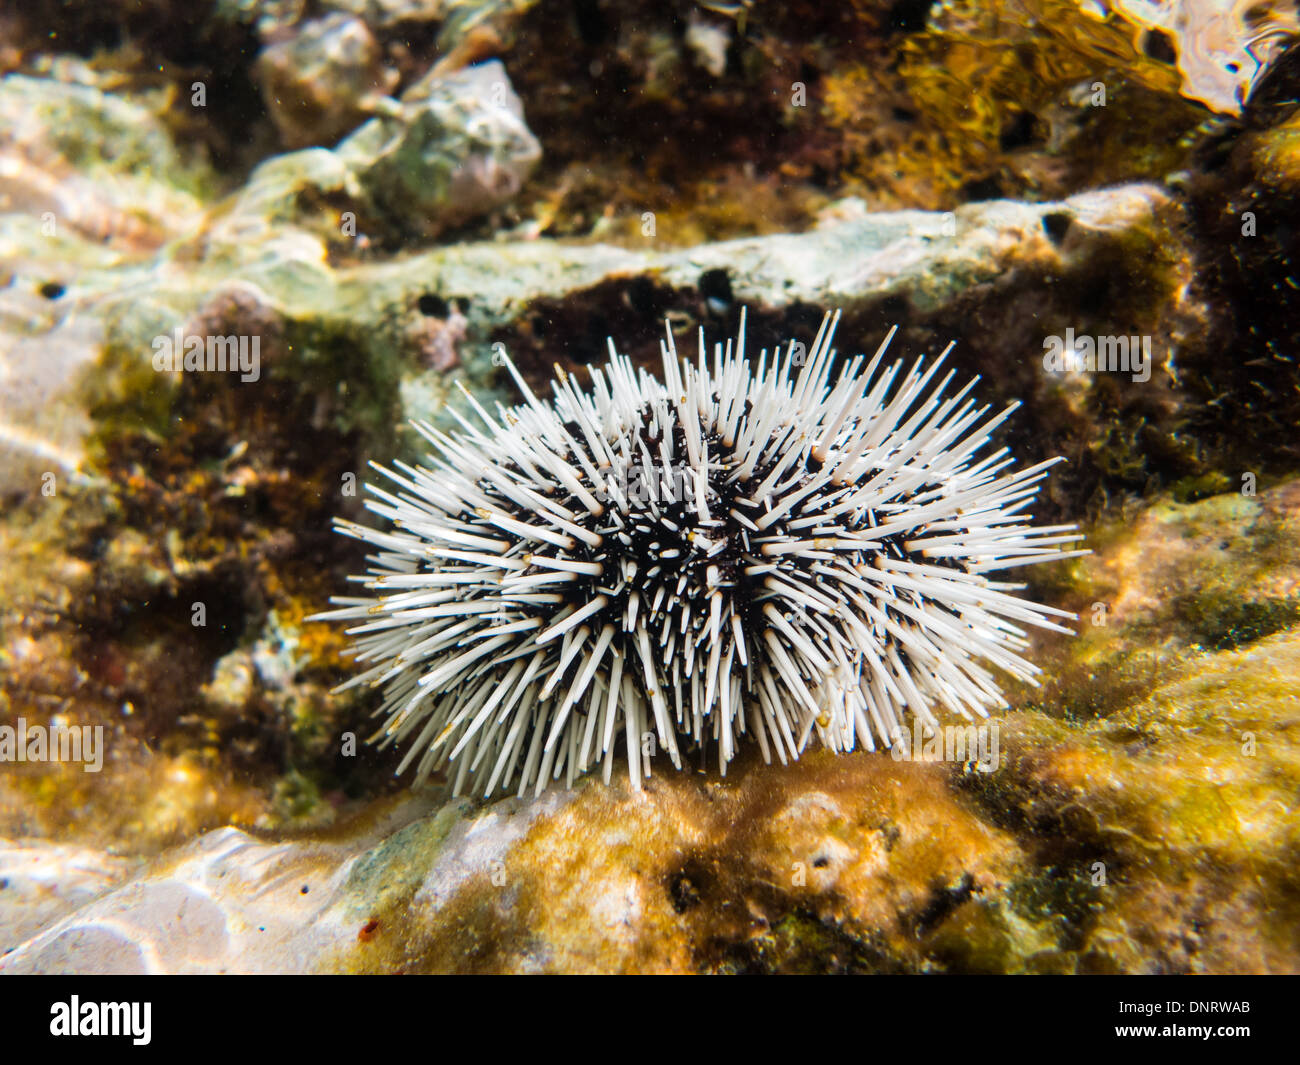 A sea Urchin underwater. Taken in the Caribbean sea off the coast of Curacao. Stock Photo